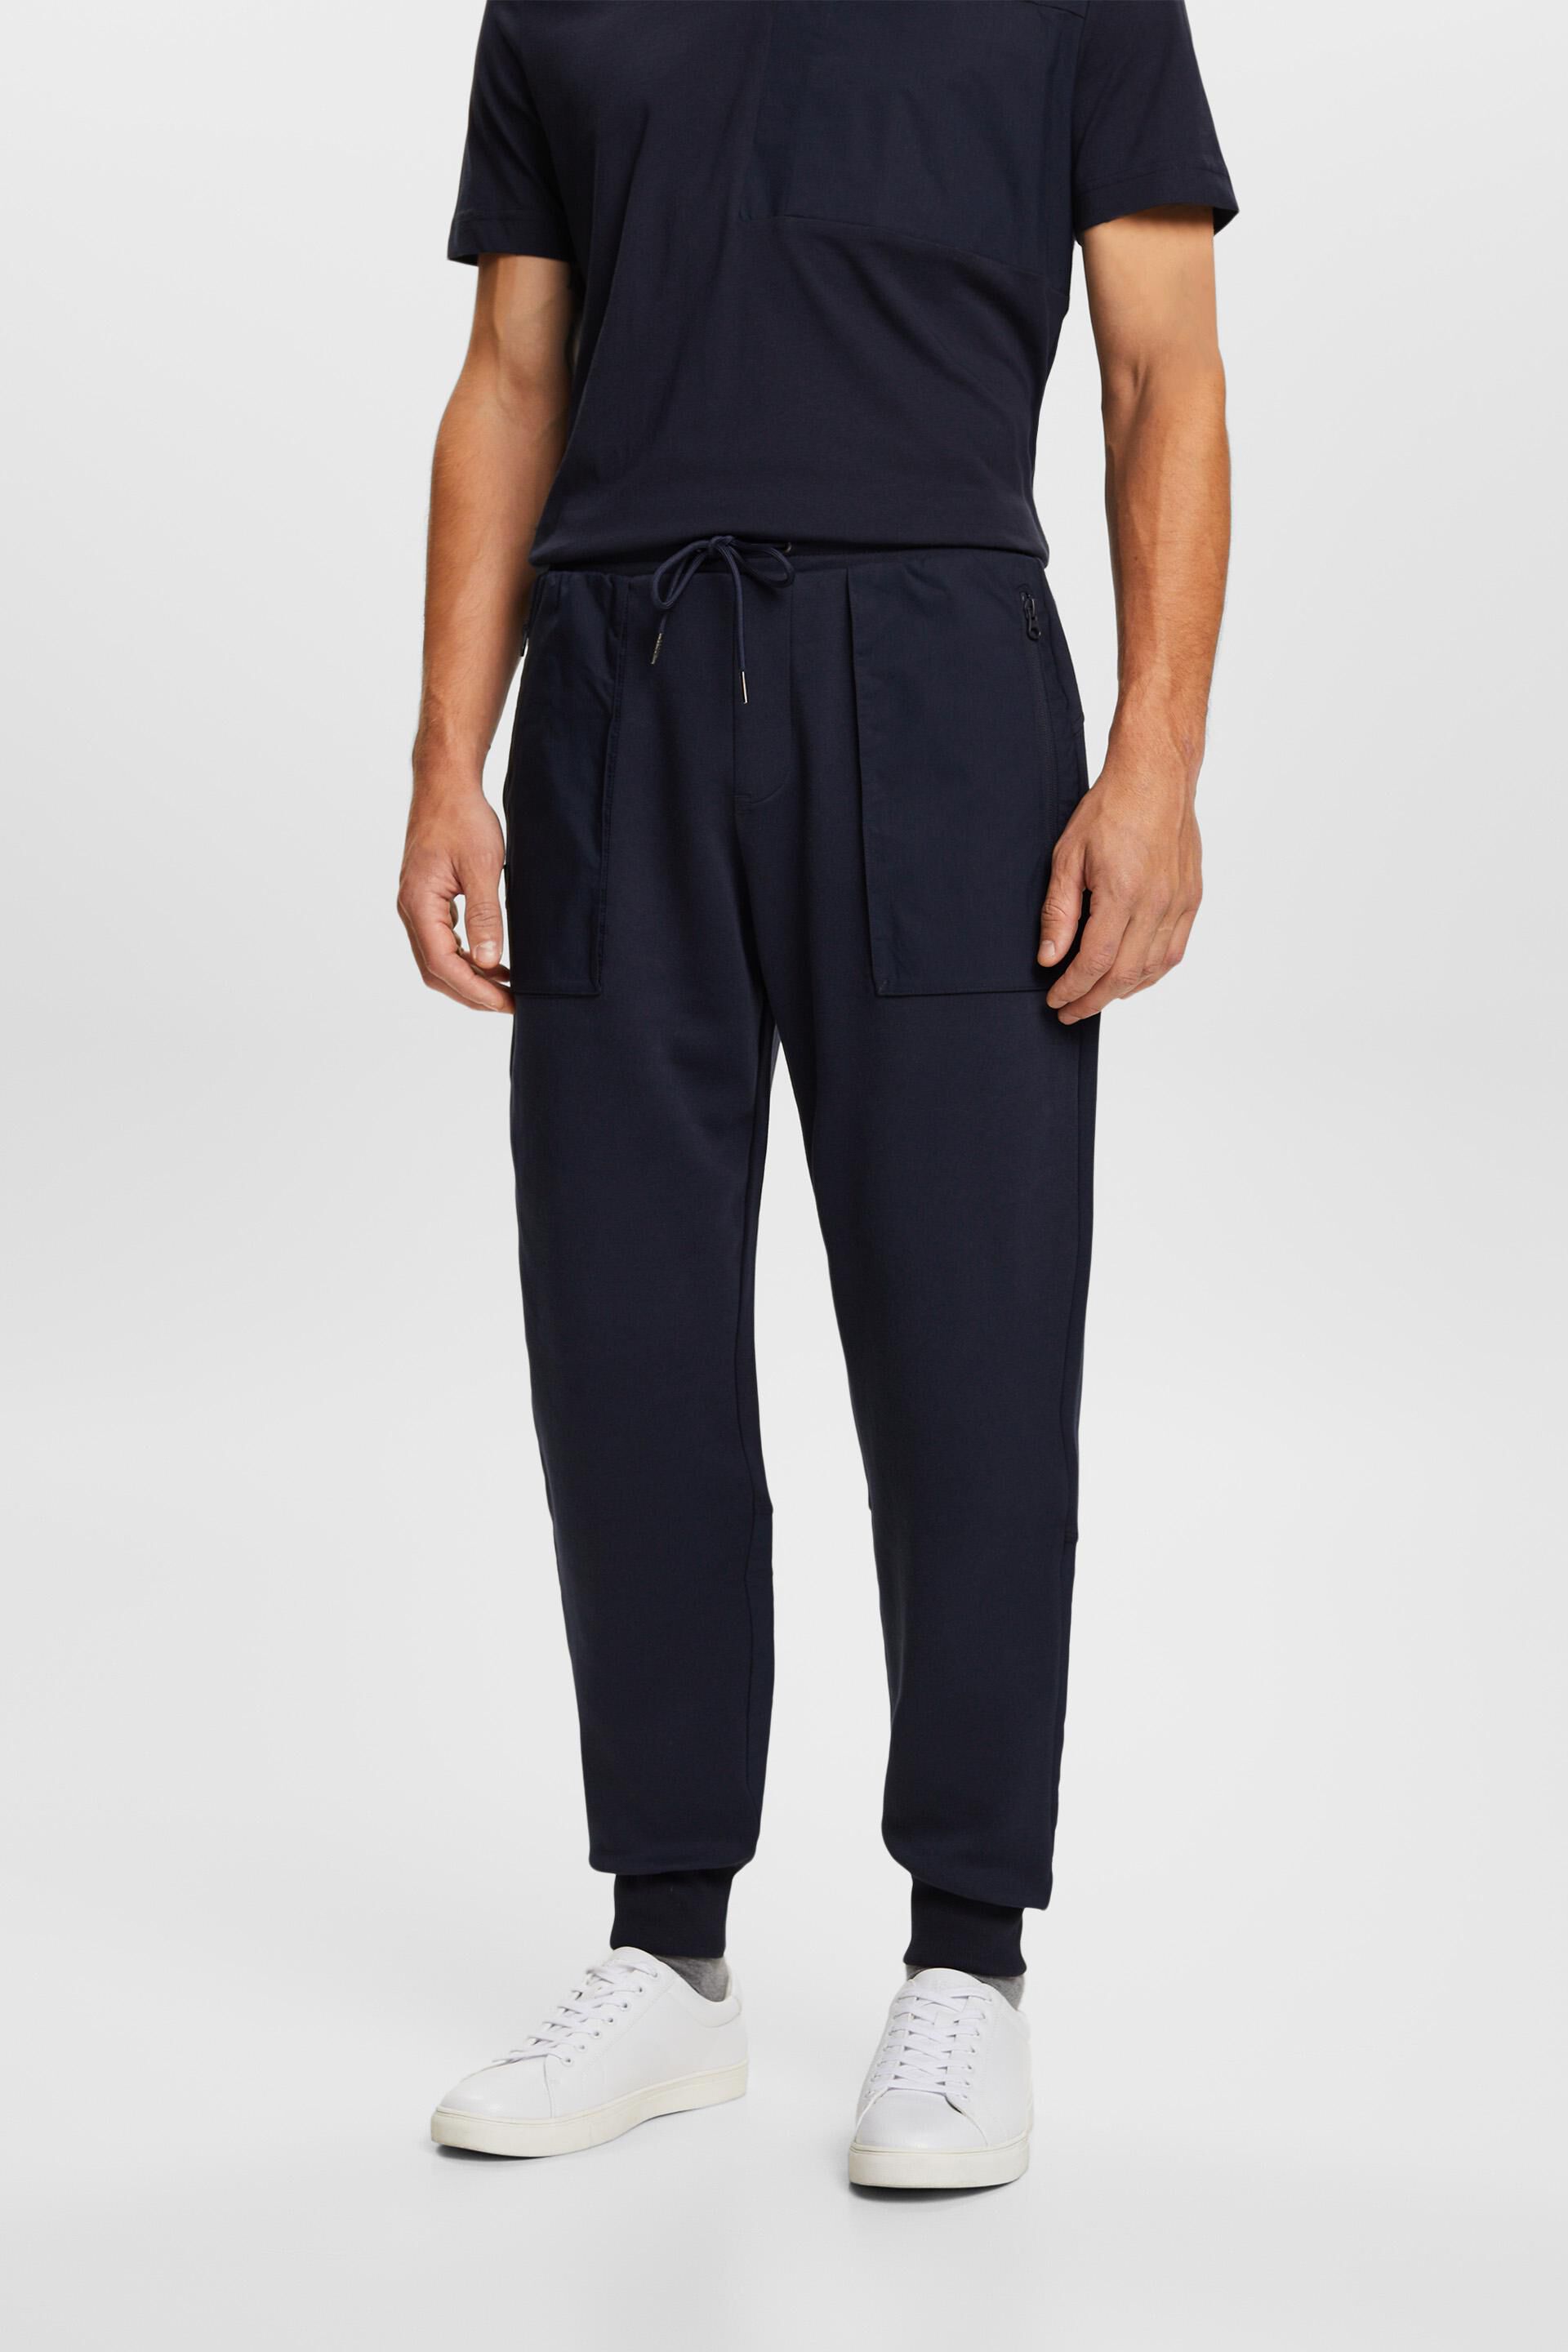 Esprit mixed joggers material in Fashion